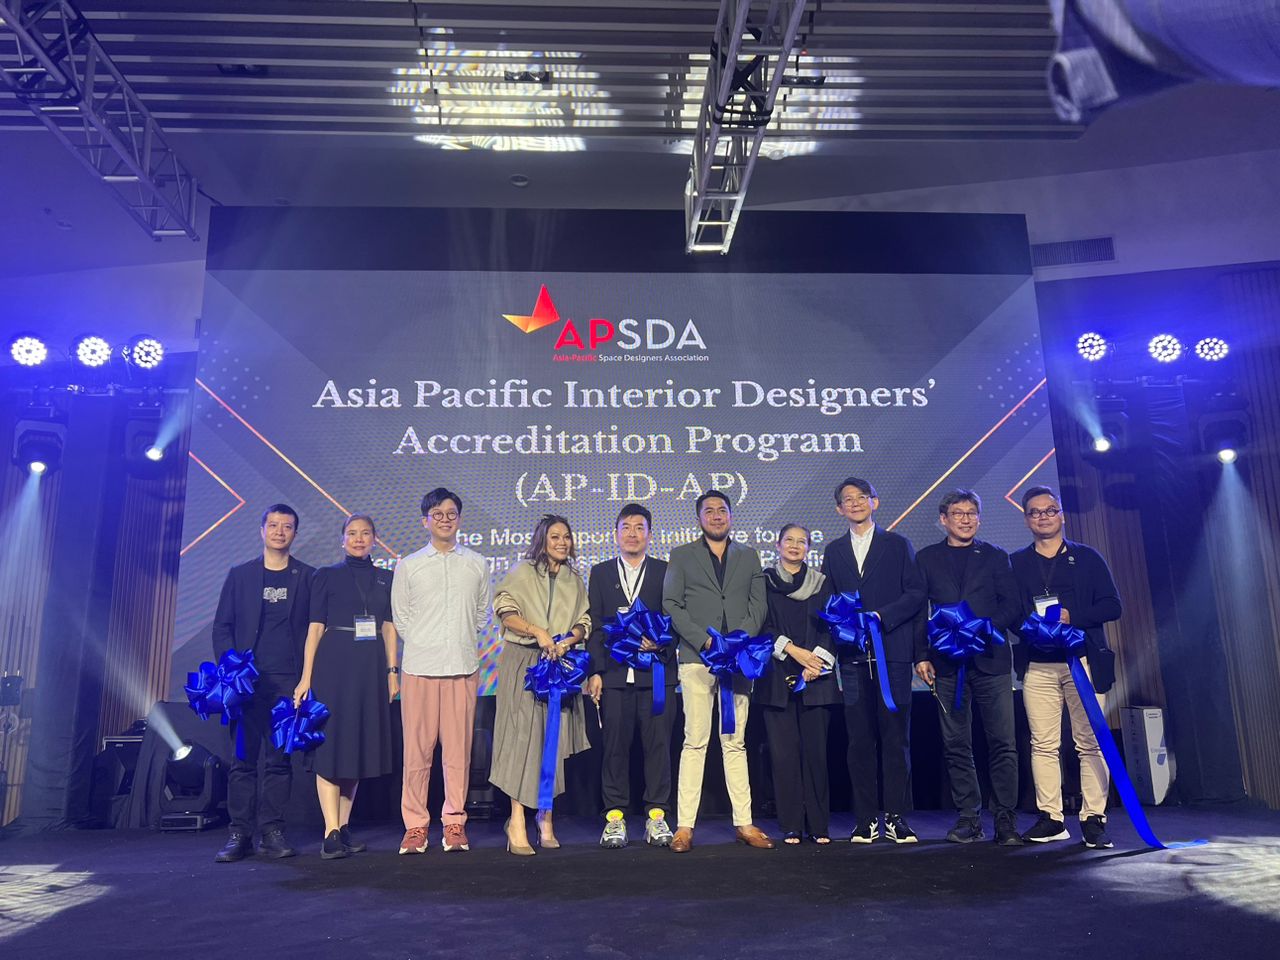  Shaping the Future of Interior Design: A Recap of APSDA Awards 2025 and AP-ID-AP Launch